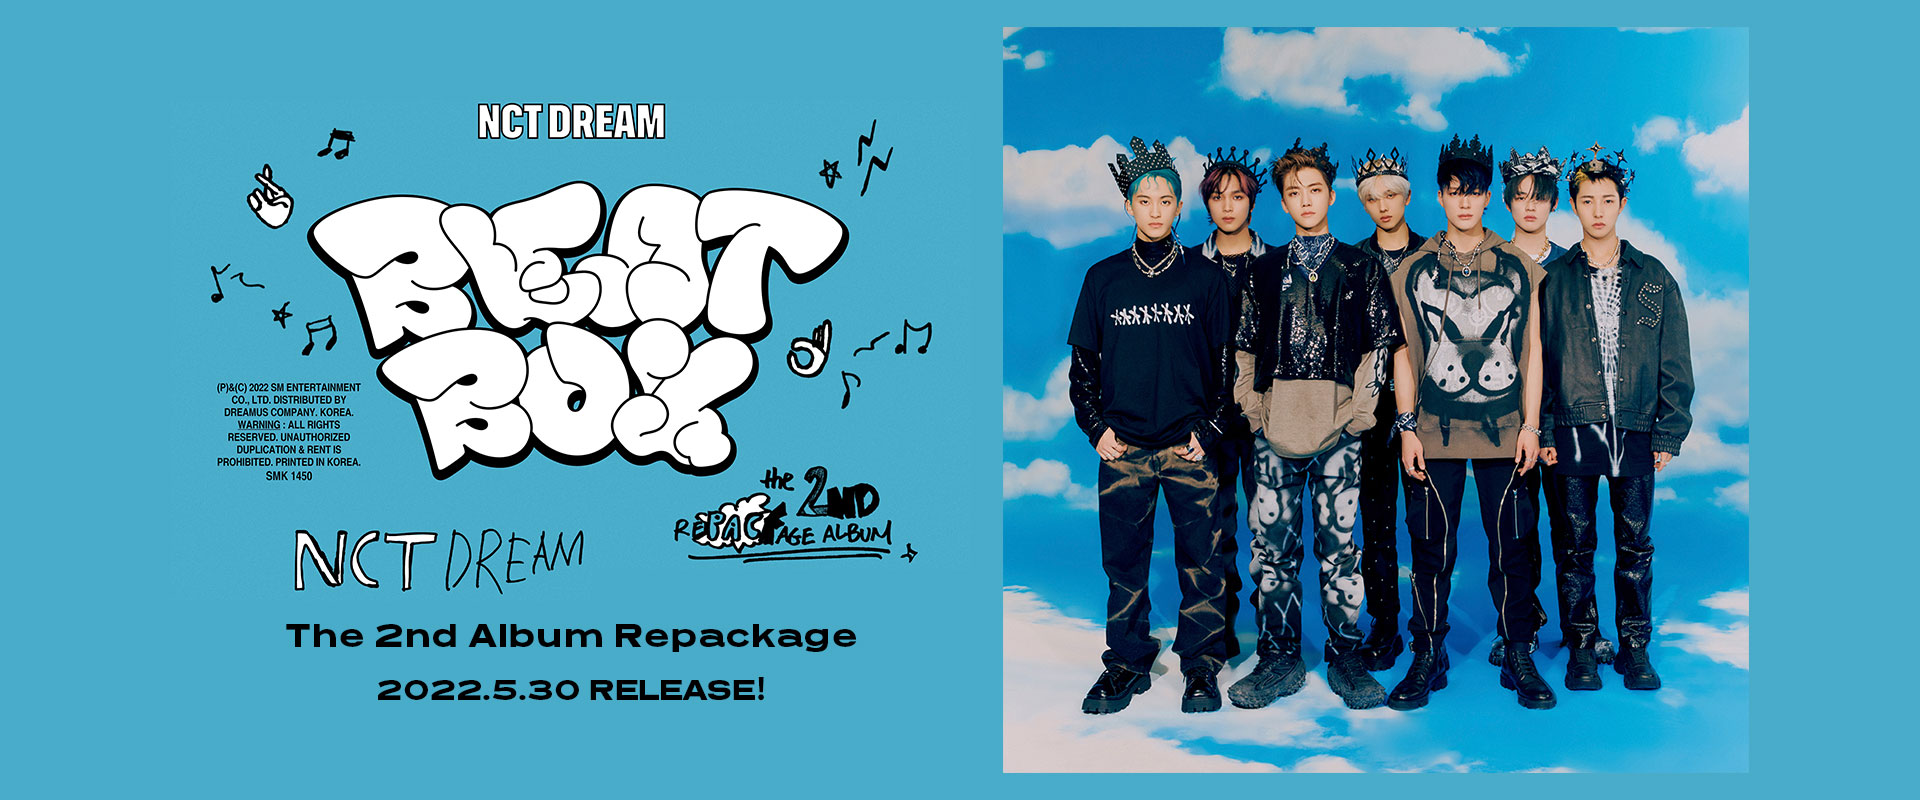 NCT DREAM The 2nd Album Repackage『Beatbox』 2022.5.30 RELEASE！